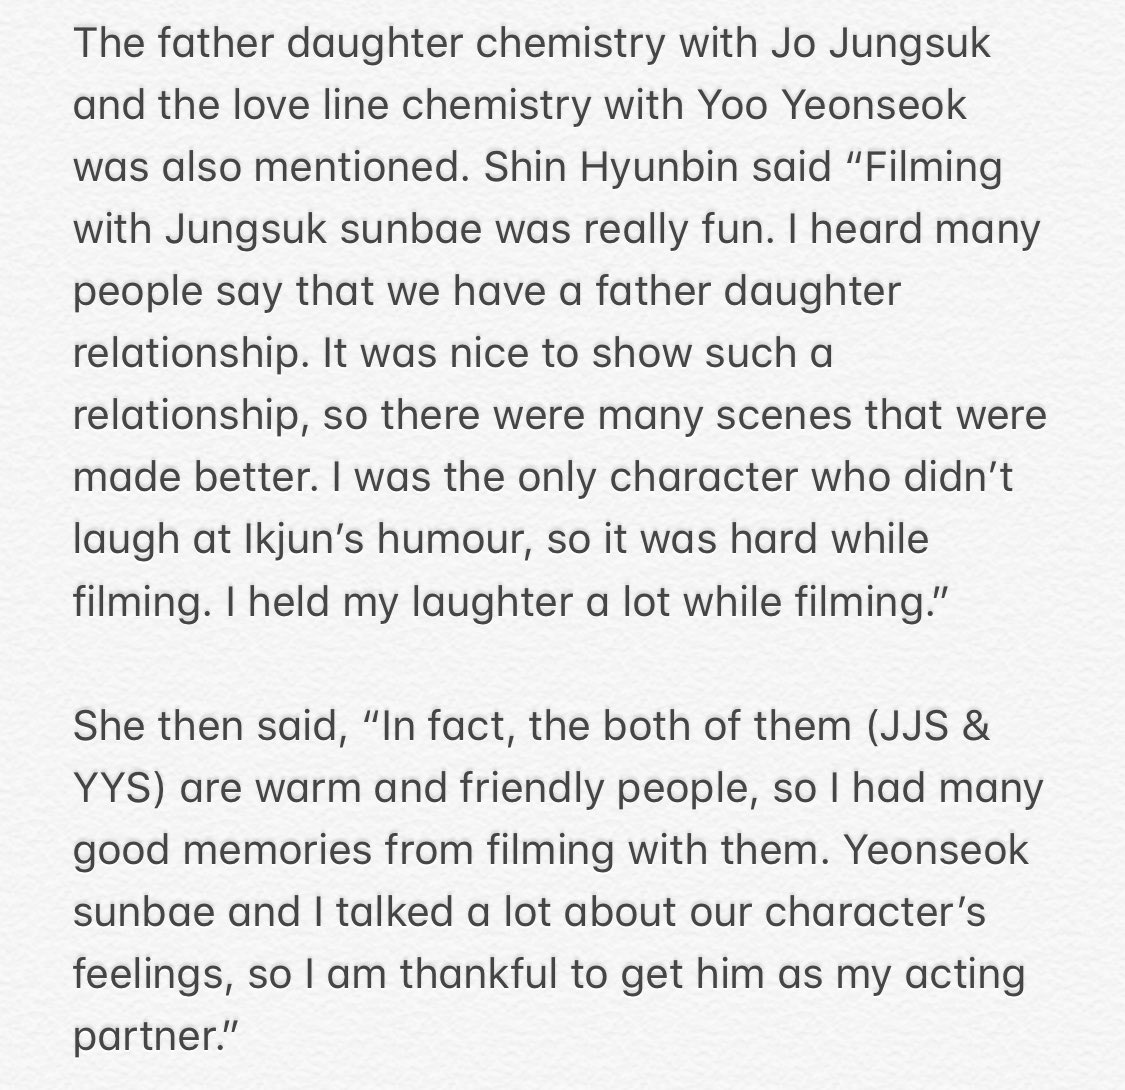 [ENG TRANS]Shin Hyunbin’s interview: article ‘Shin Hyunbin upporting Uju-Mone couple, her favourite stock’Part 2 - talking about the love lines, and chemistry with jungsuk & yeonseok https://n.news.naver.com/entertain/article/609/0000284016